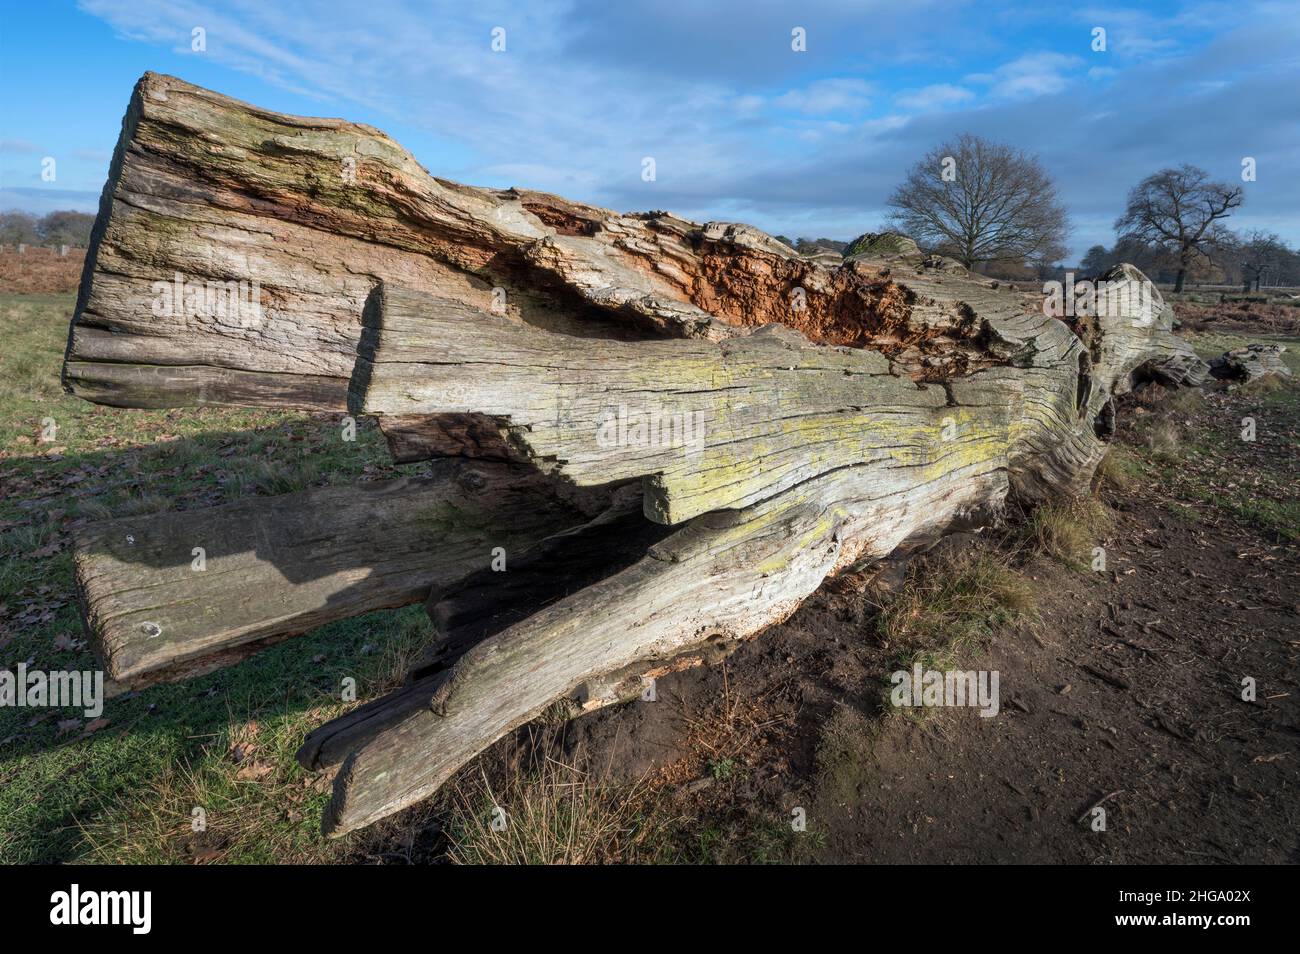 Fallen tree left to rot as nature takes over Stock Photo